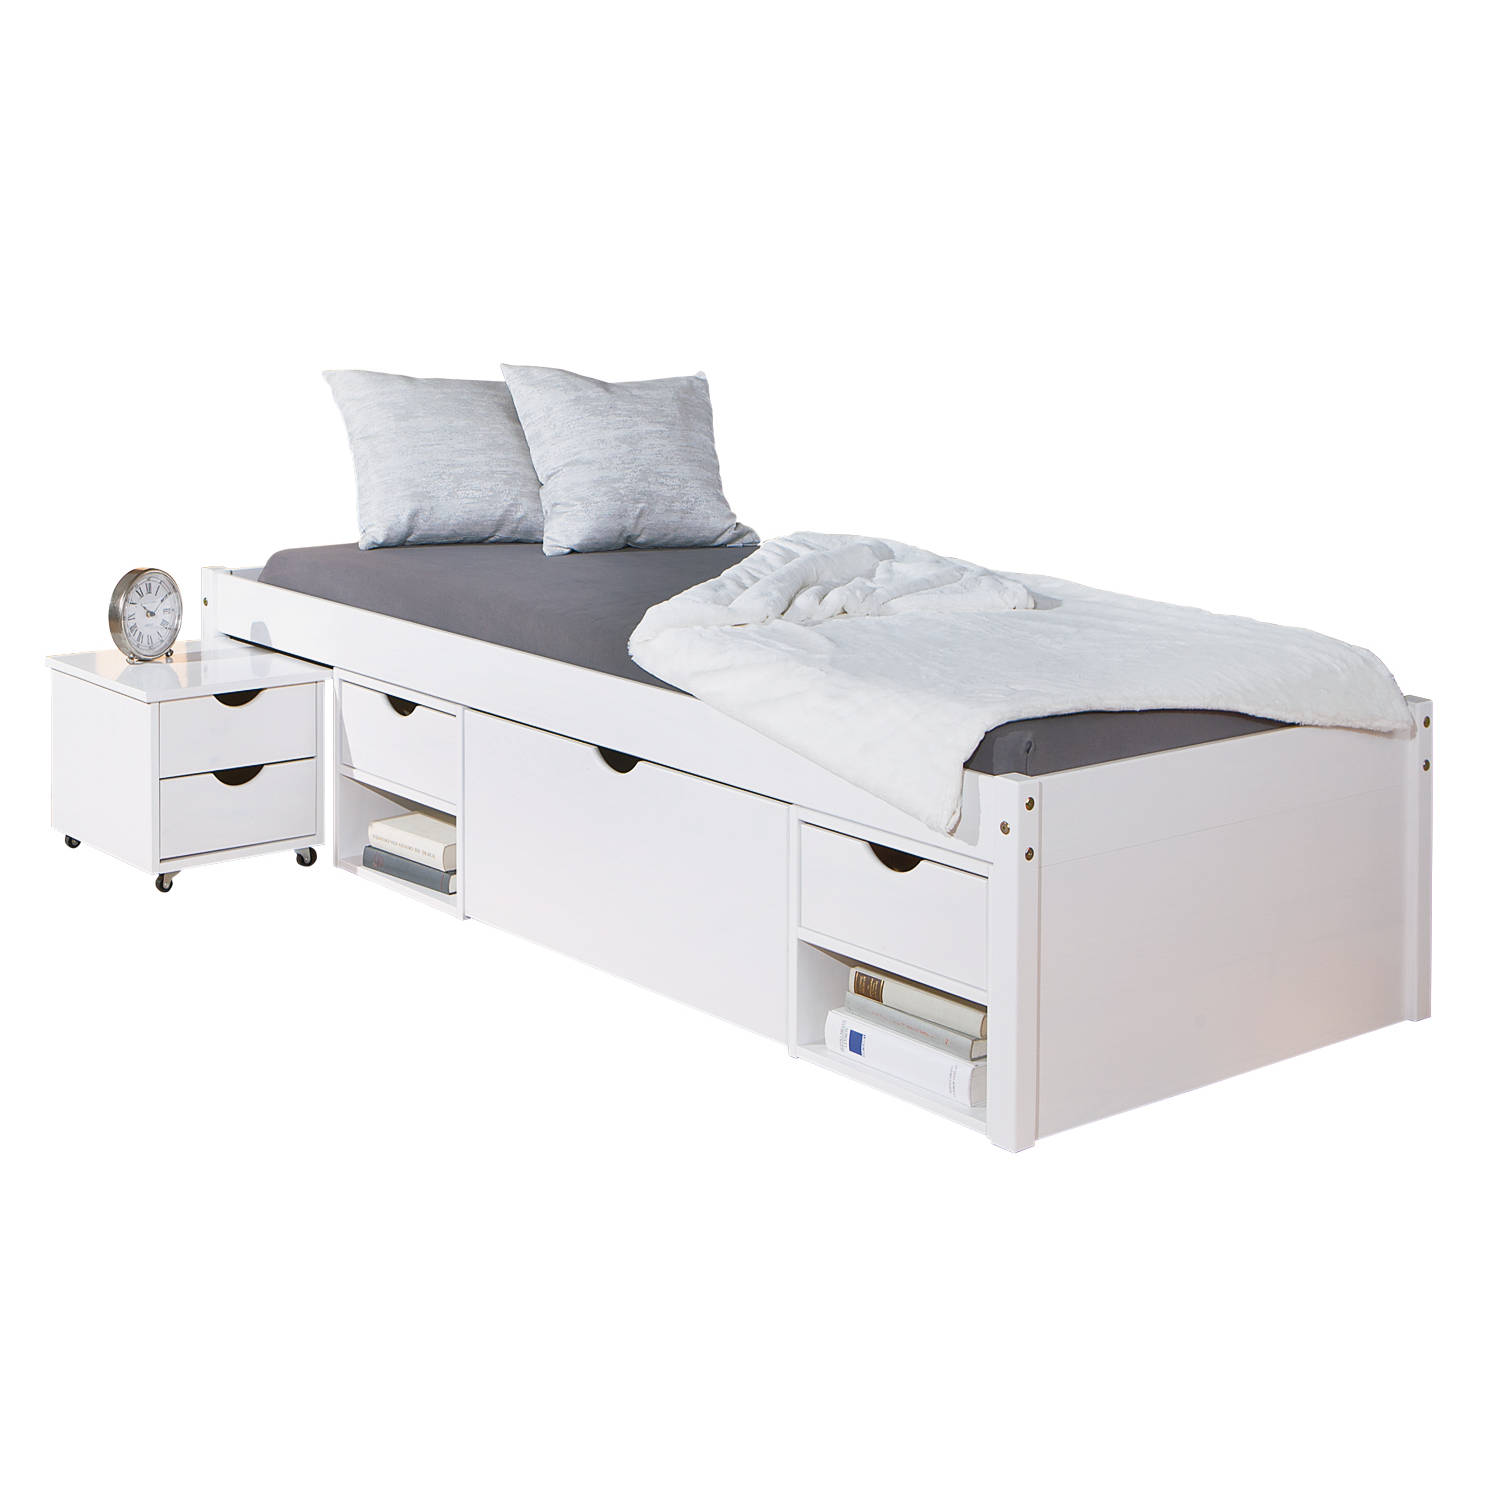 Timm Bed 90x200 Cm Wit.